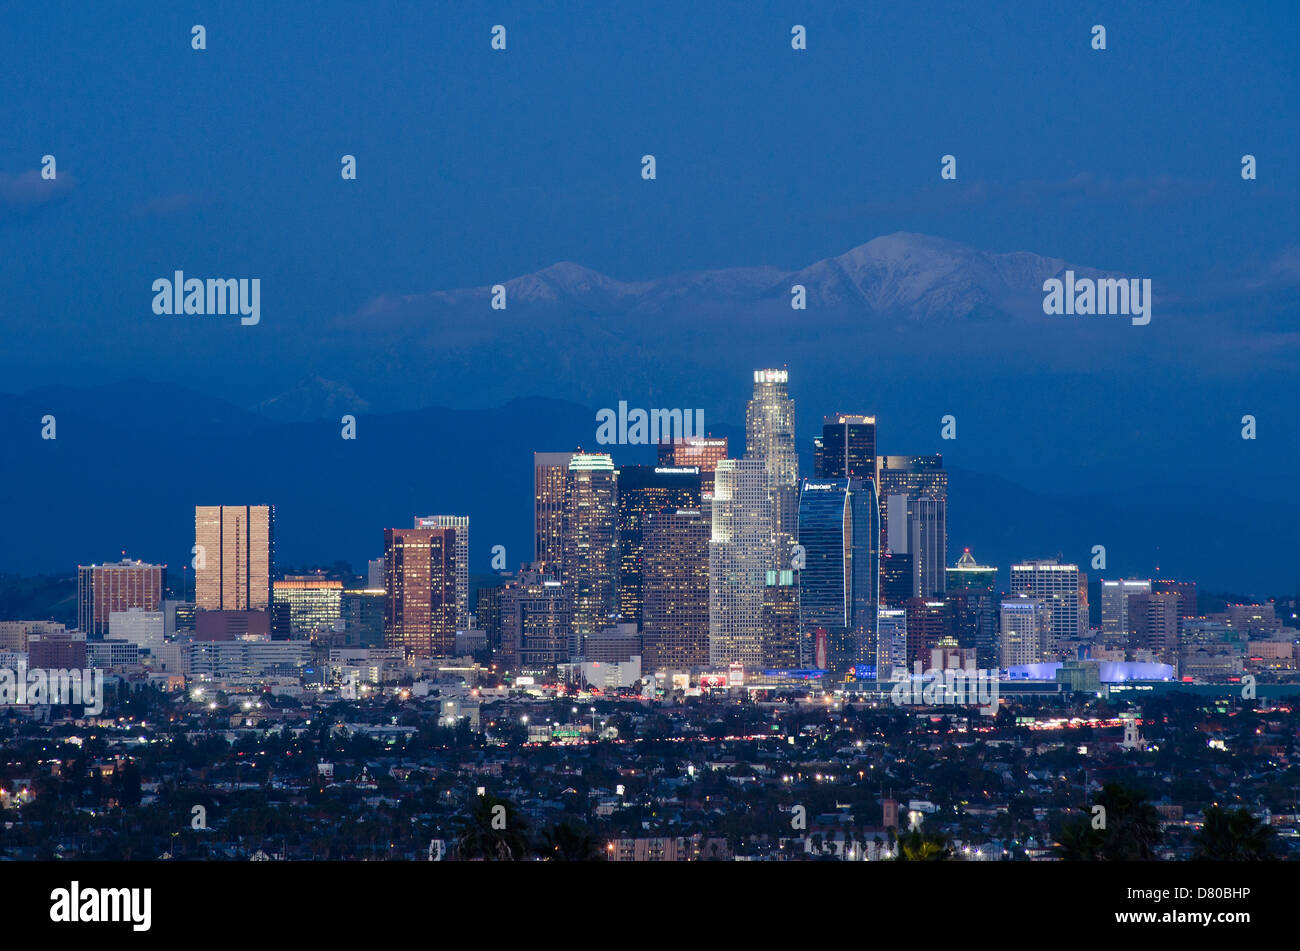 City skyline lit up at night, Los Angeles, California, United States Banque D'Images